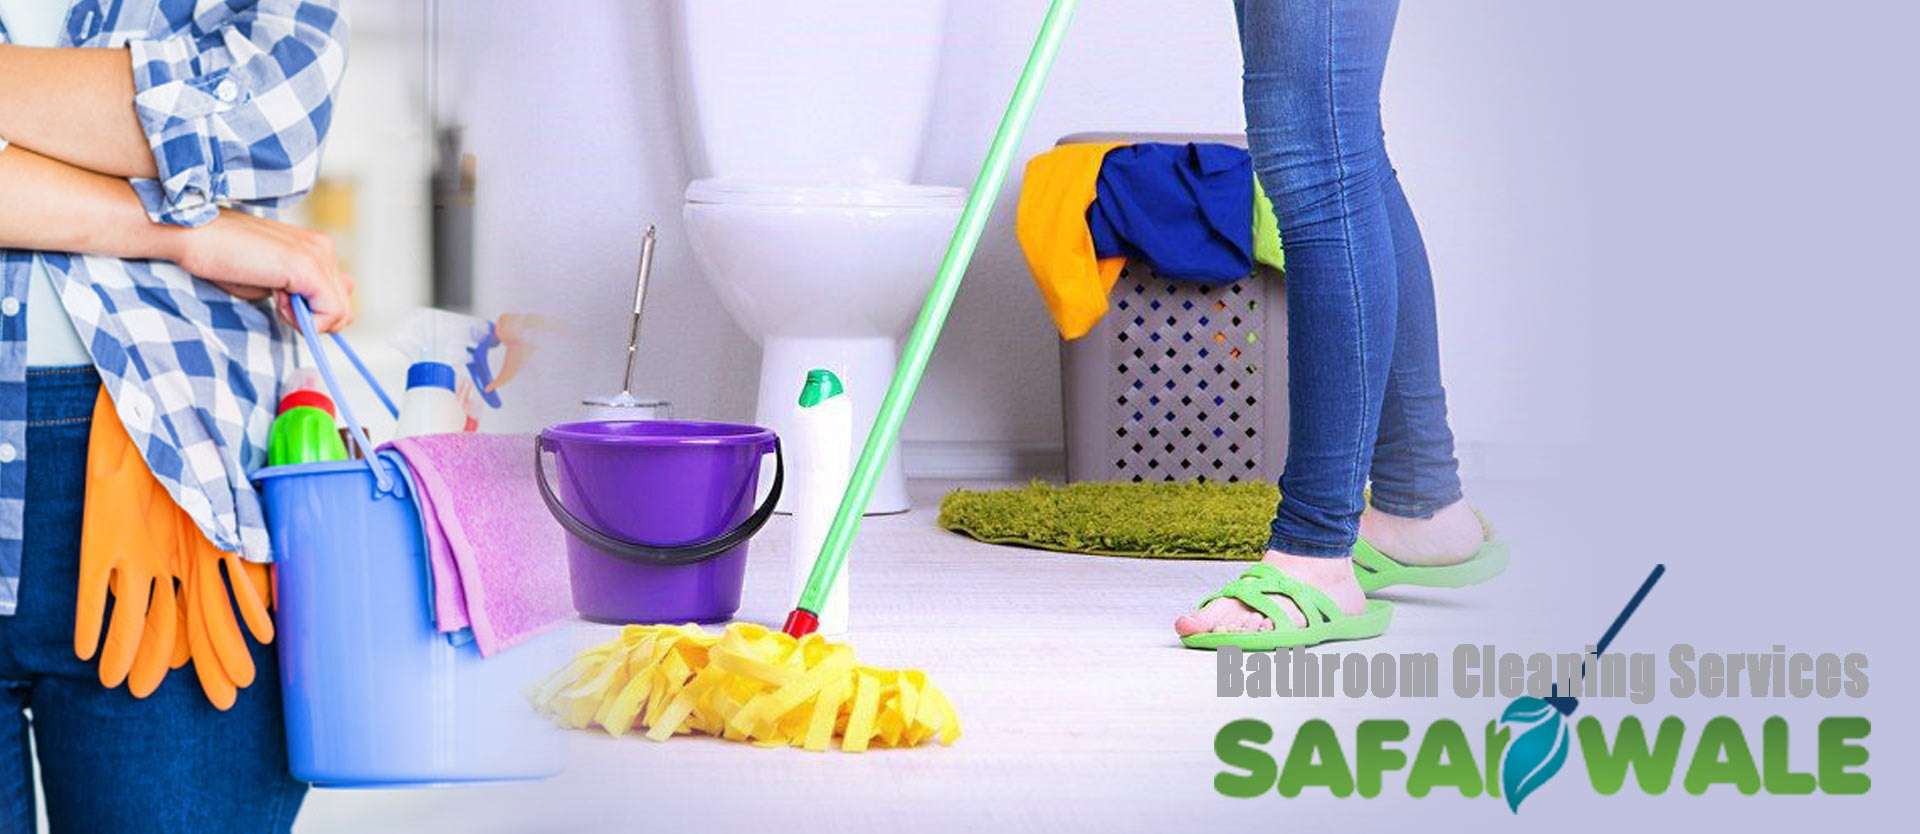 Bathroom Cleaning Services In Sector 61 Noida